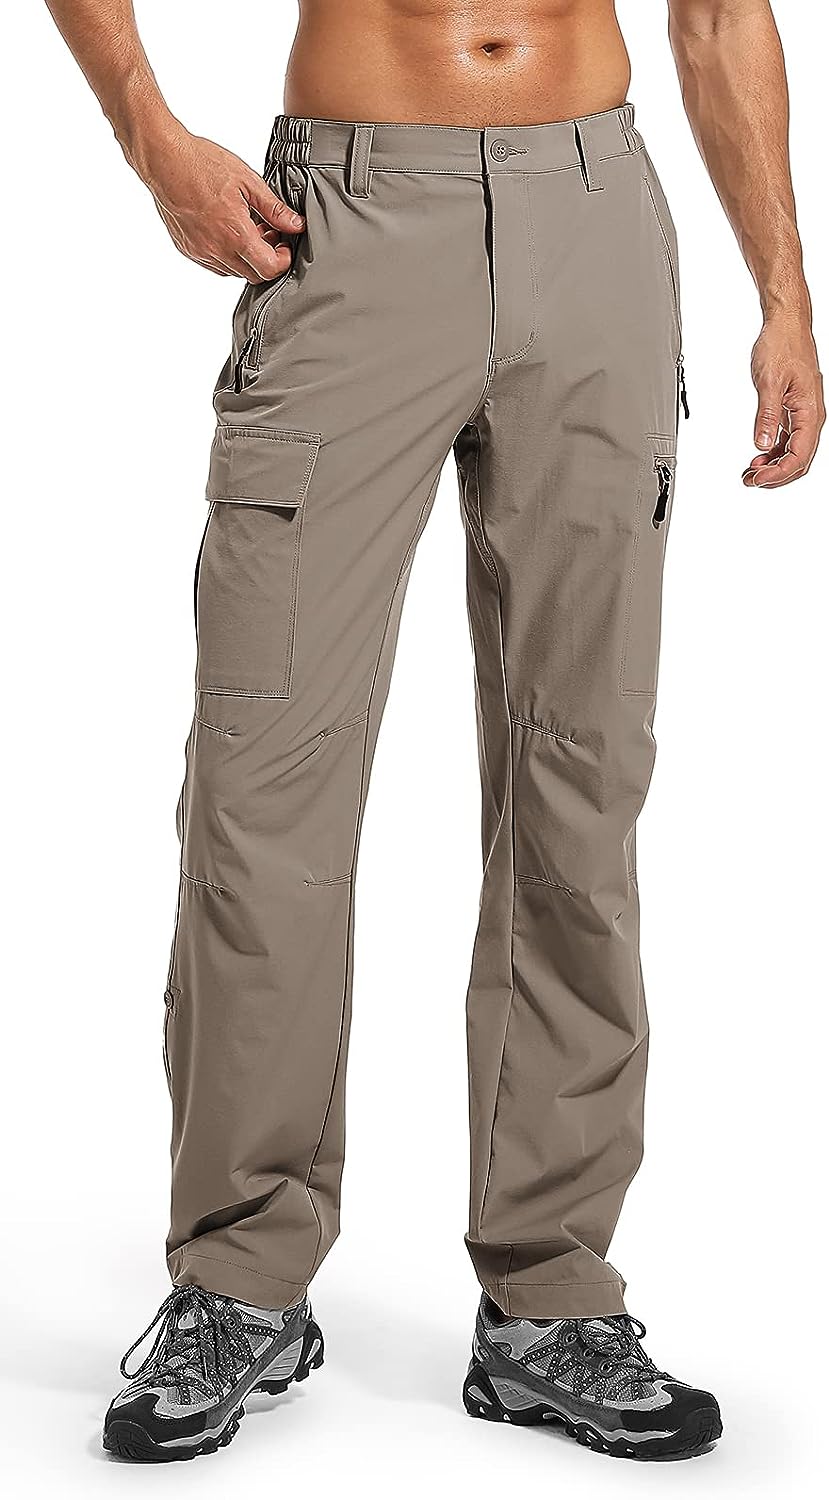 Men's Hiking Cargo Pants - Lightweight, Quick Dry, Waterproof for Tactical  Outdoor Hunting, Camping, Fishing